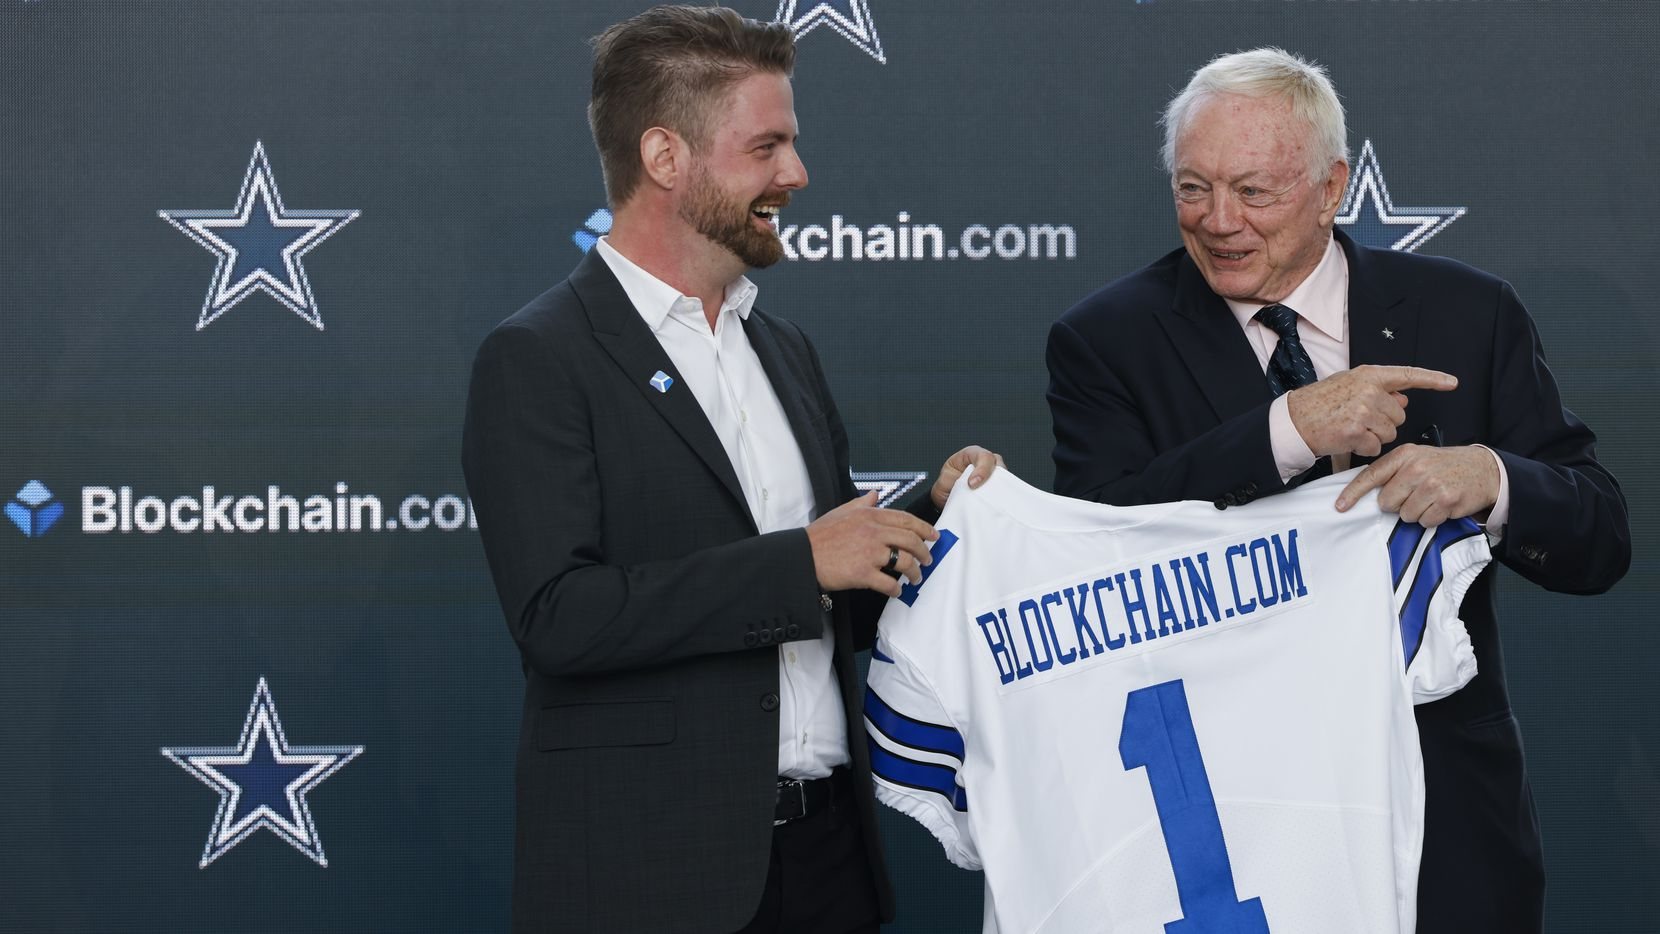 Dallas Cowboys Ink Deal With Blockchain.com as NFL Teams Begin Crypto Embrace